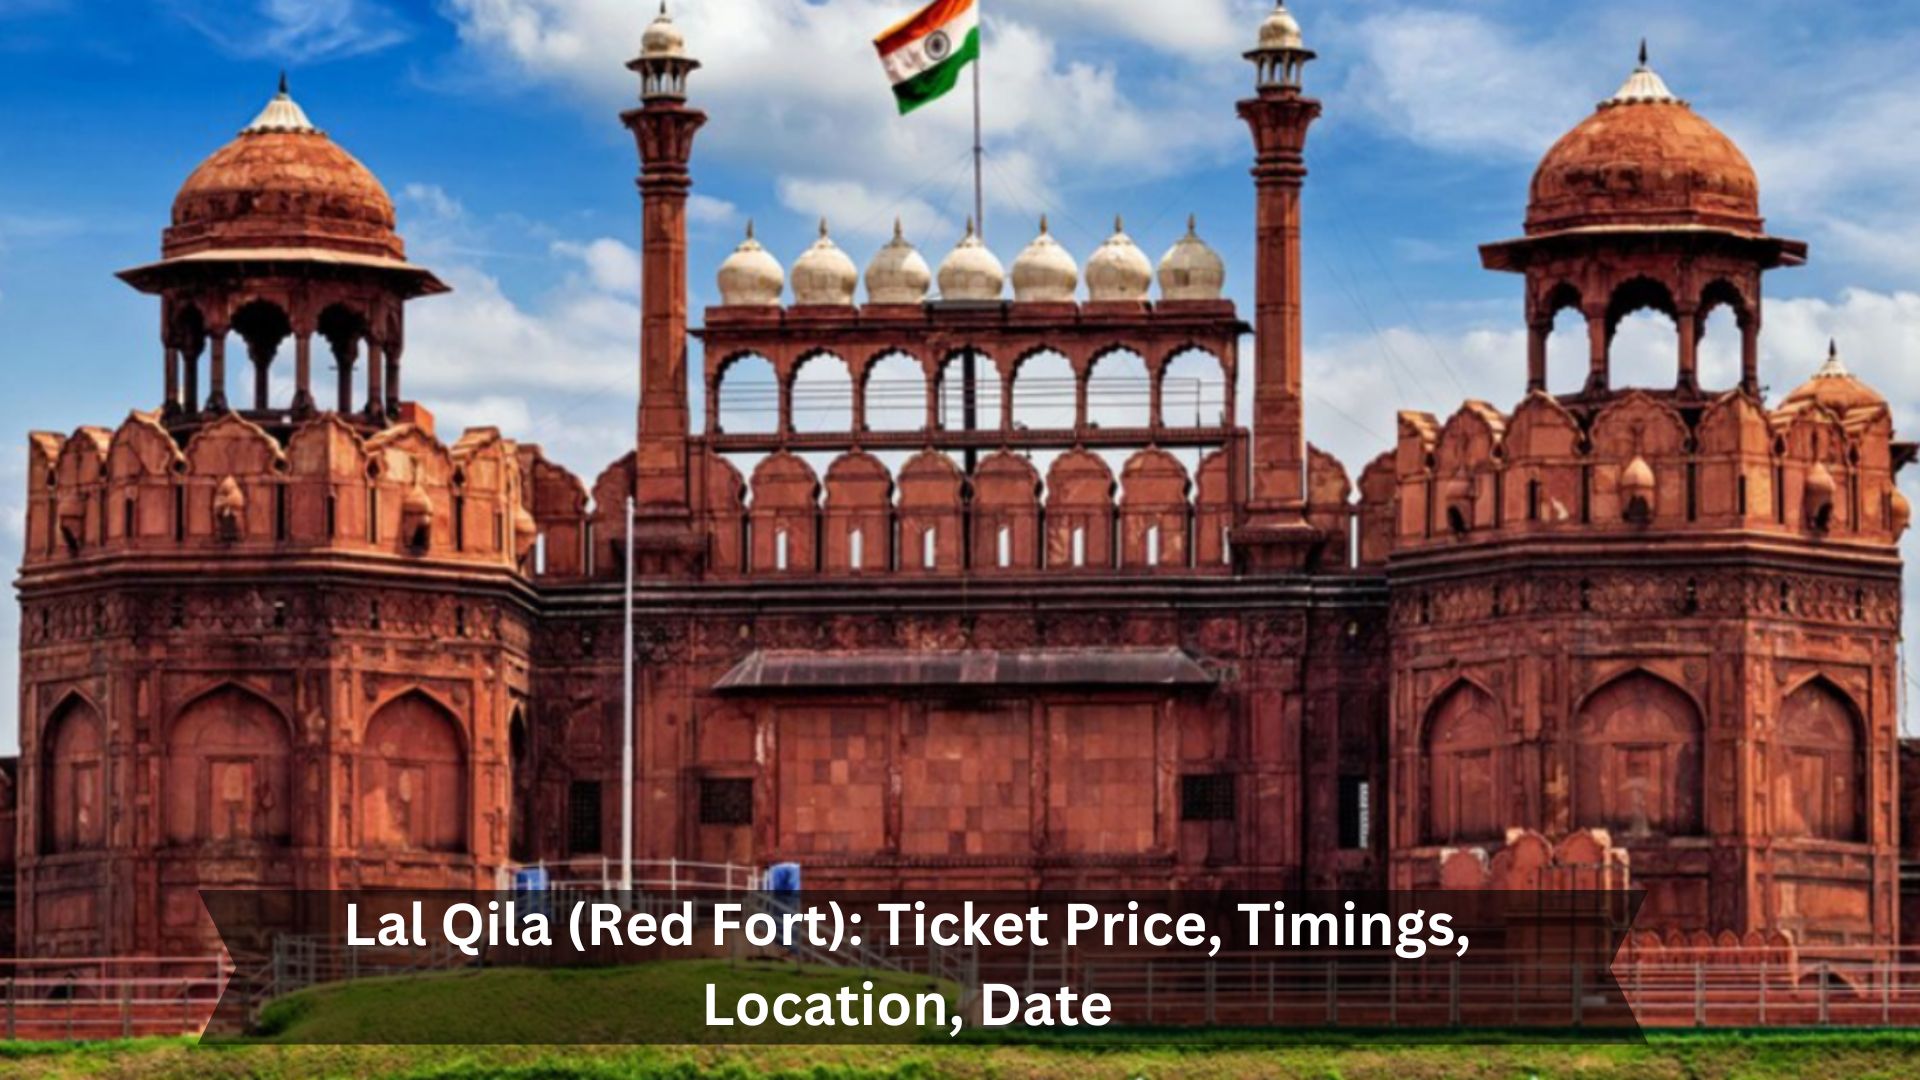 Lal-Qila-Red-Fort-Ticket-Price-Timings-Location-Date